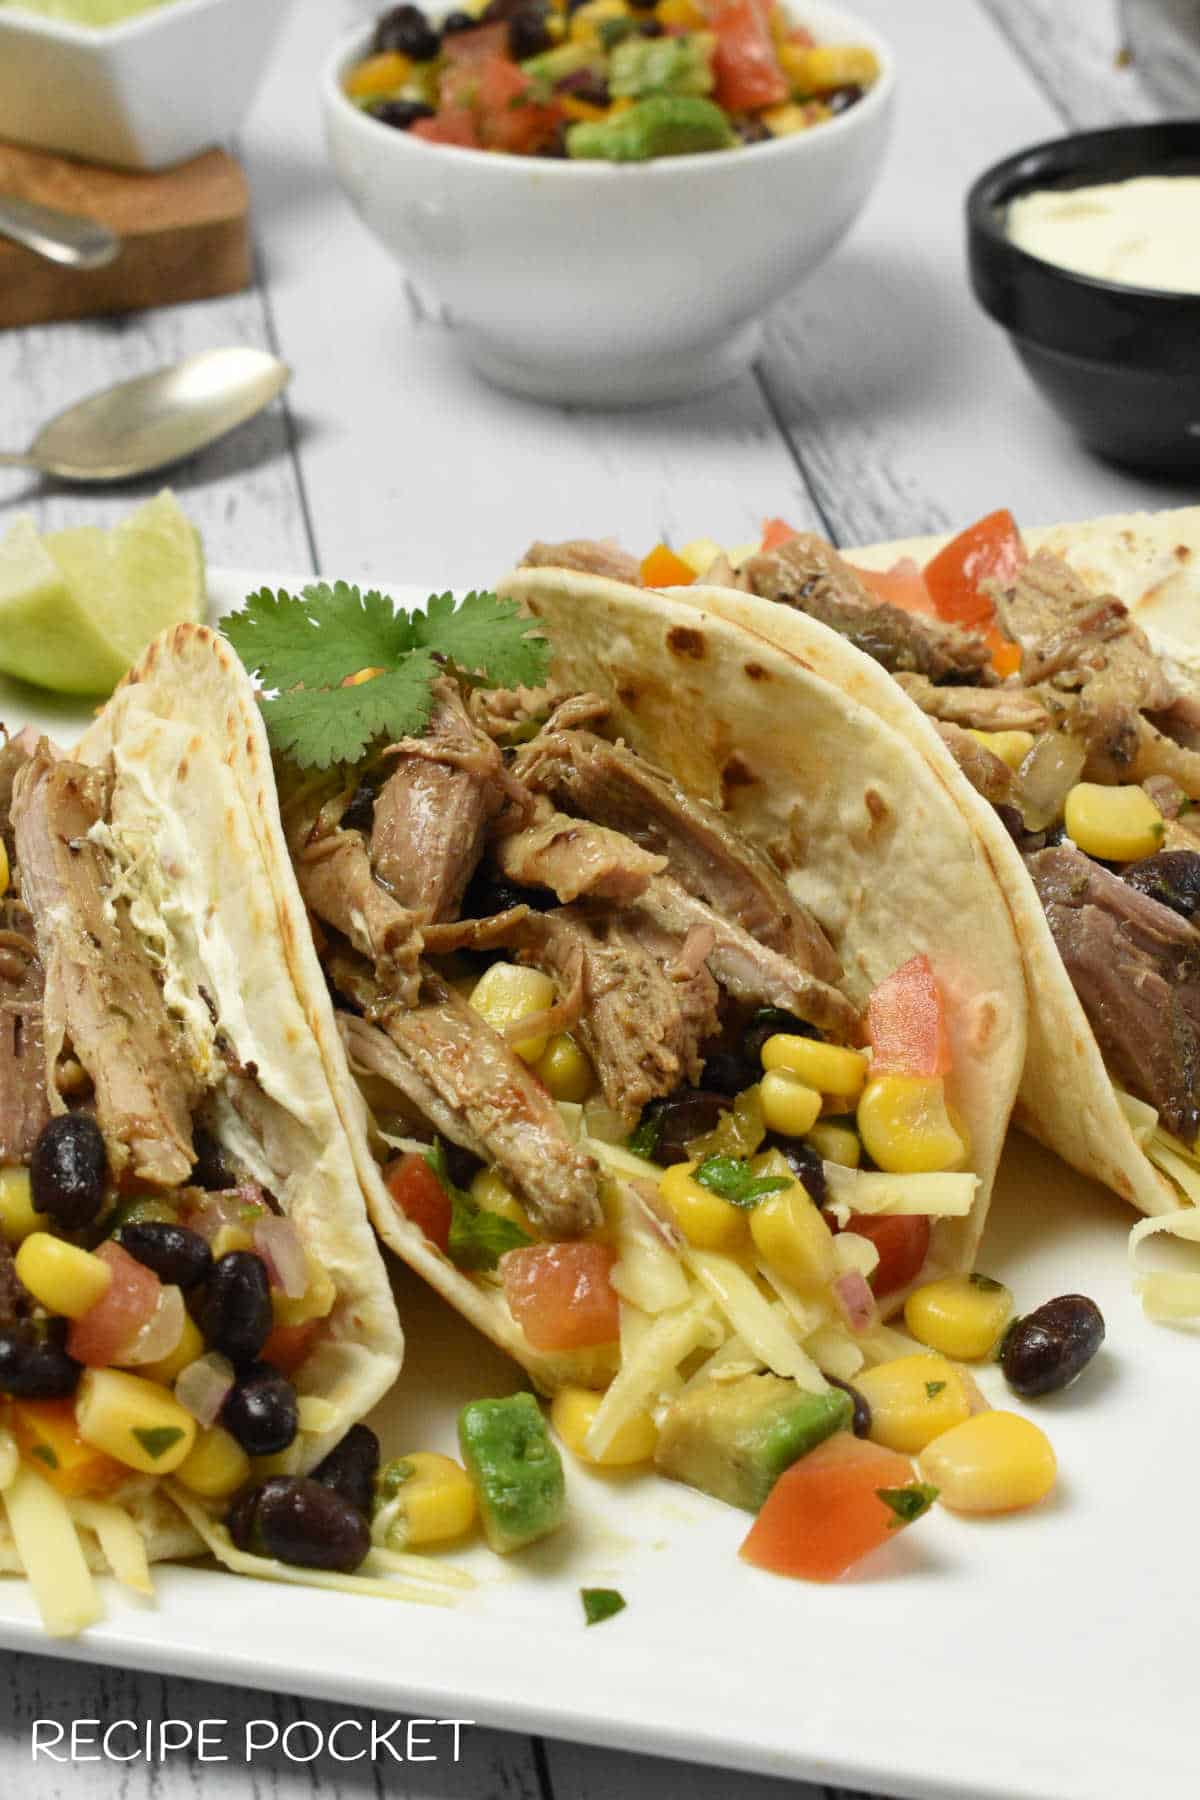 Soft shell taco with pulled pork and black bean and corn salad.